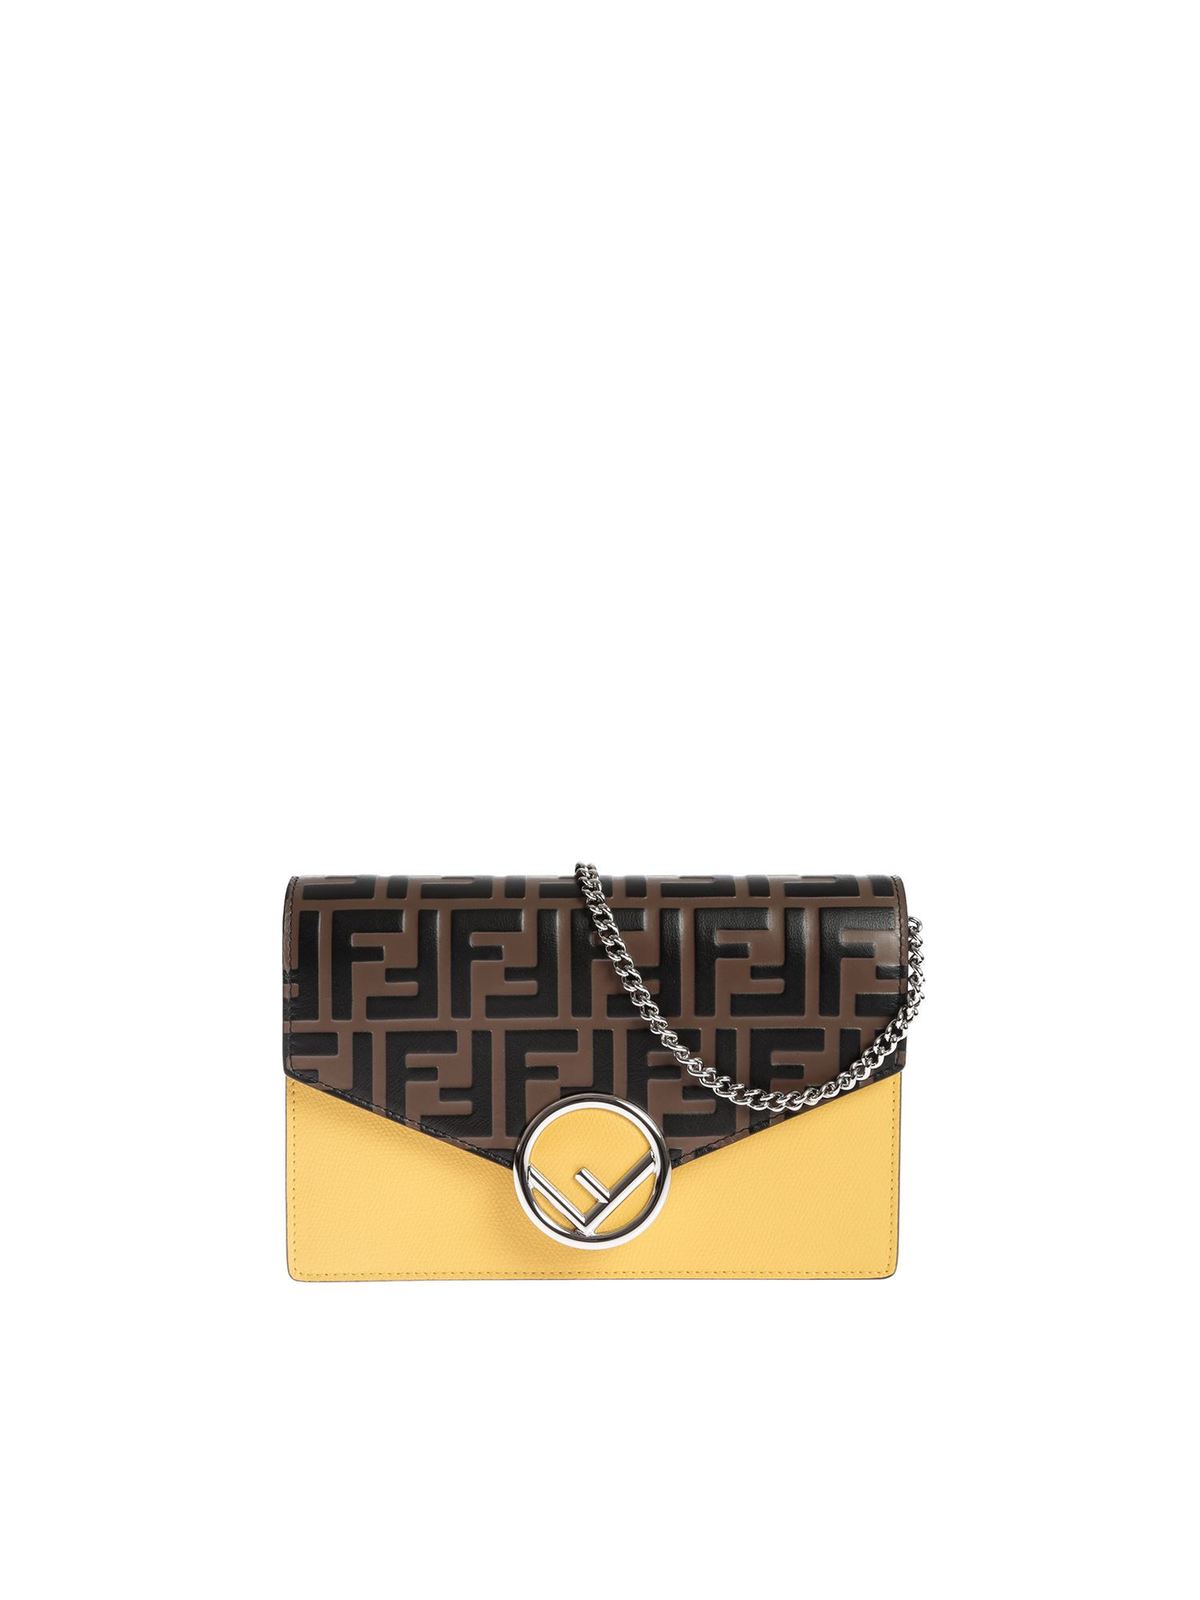 FENDI WALLET ON CHAIN BAG IN YELLOW WITH BROWN FF